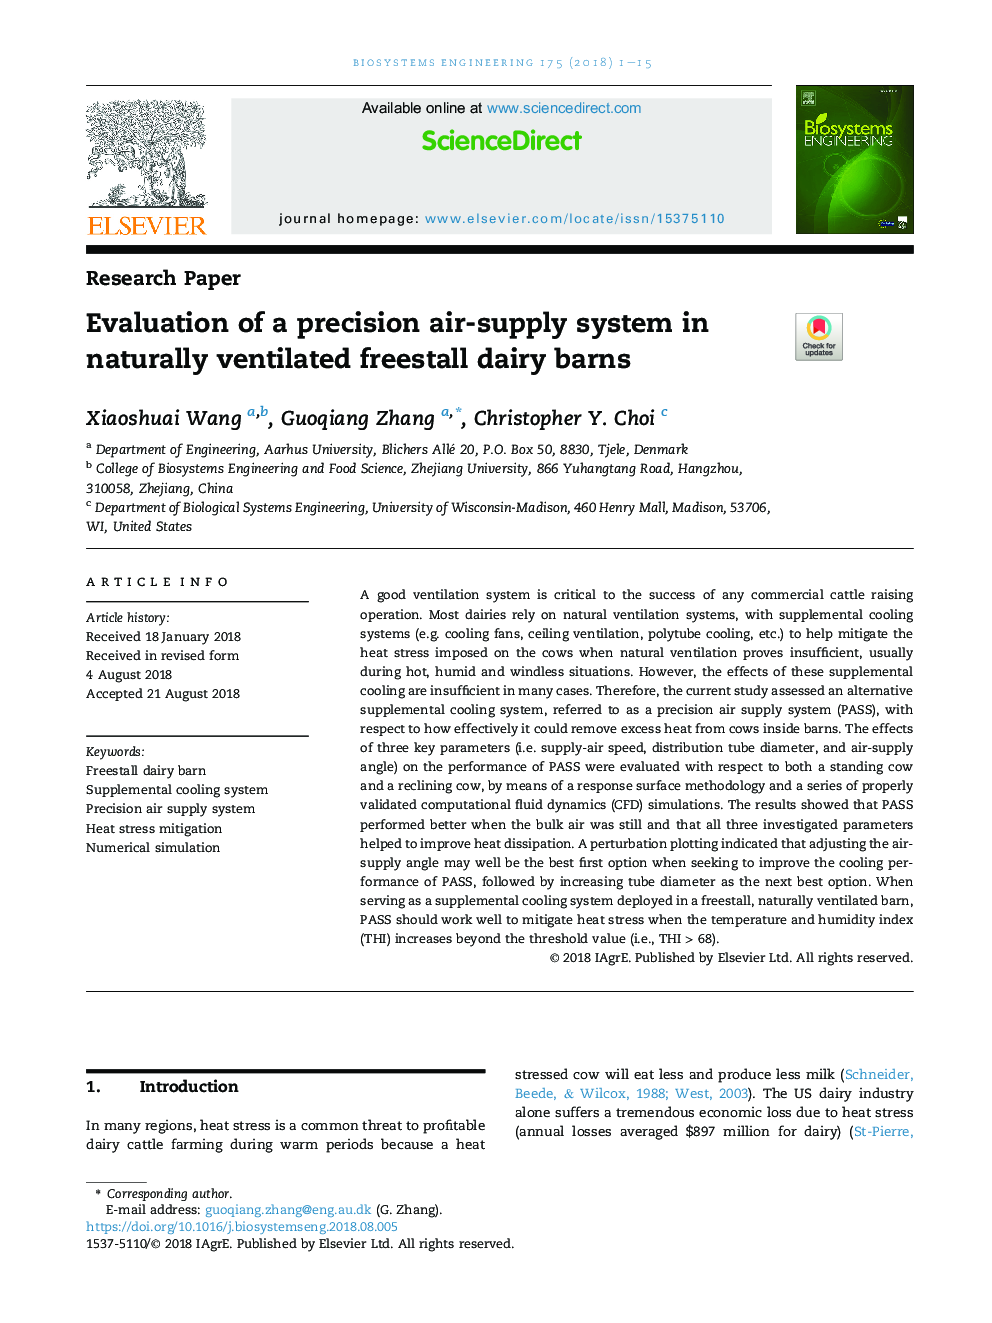 Evaluation of a precision air-supply system in naturally ventilated freestall dairy barns